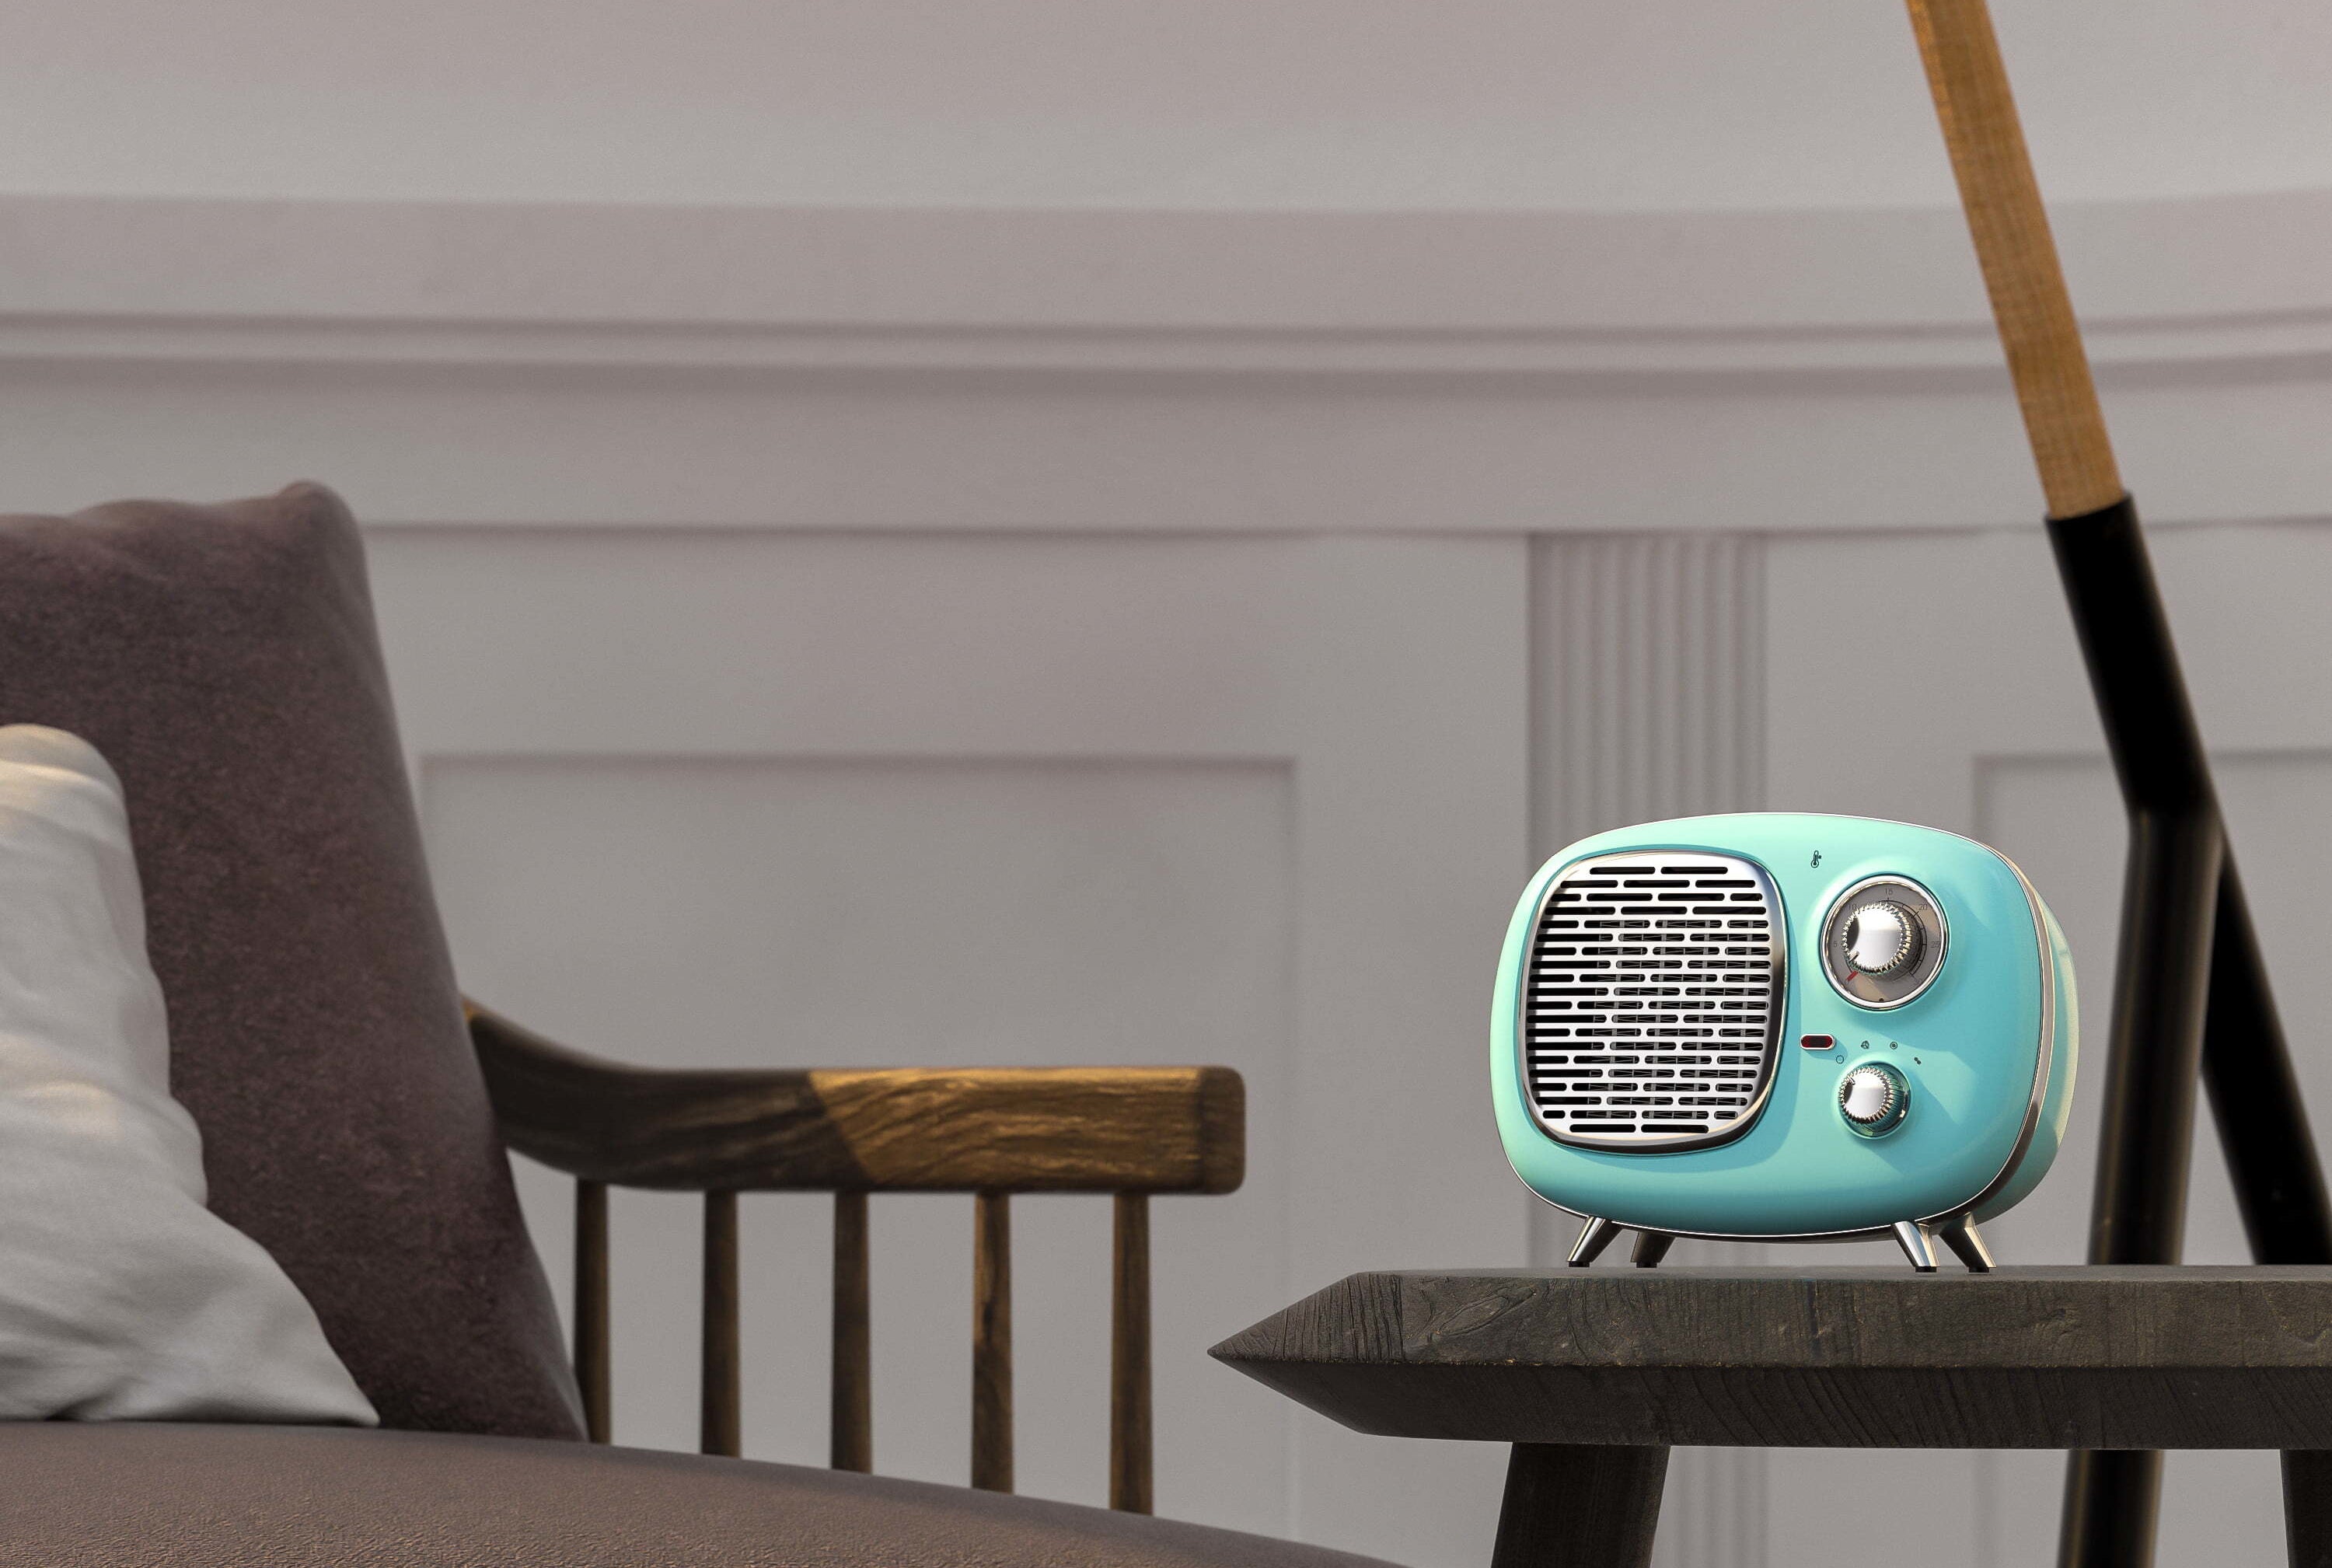 The heater, which resembles a retro radio, with a rounded body, metallic knobs and grill, and four legs, in mint green